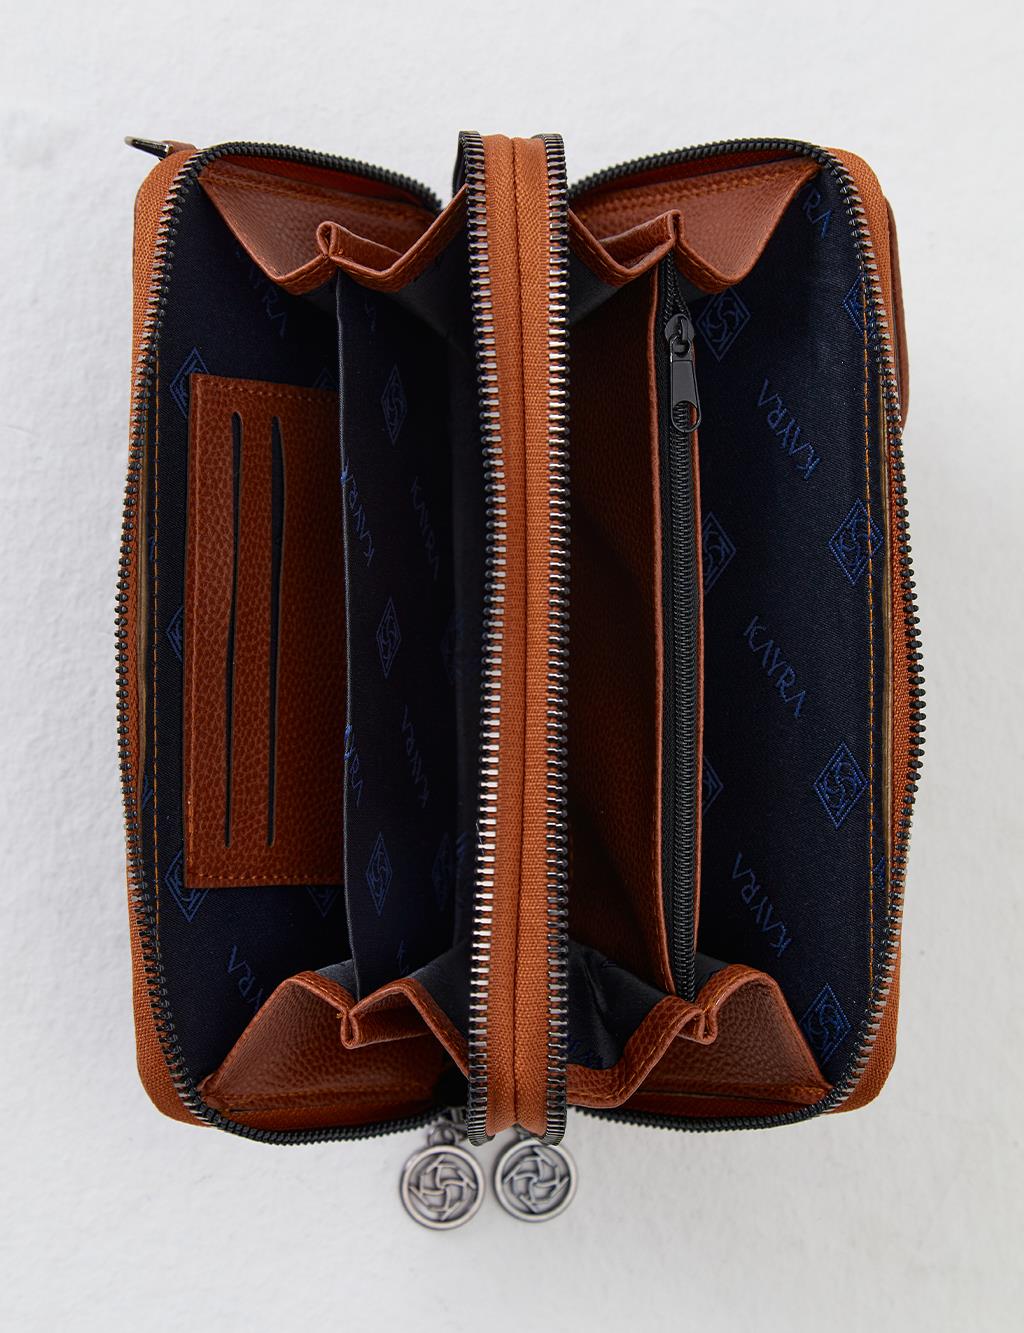 Two Compartment Wallet Bag Tobacco